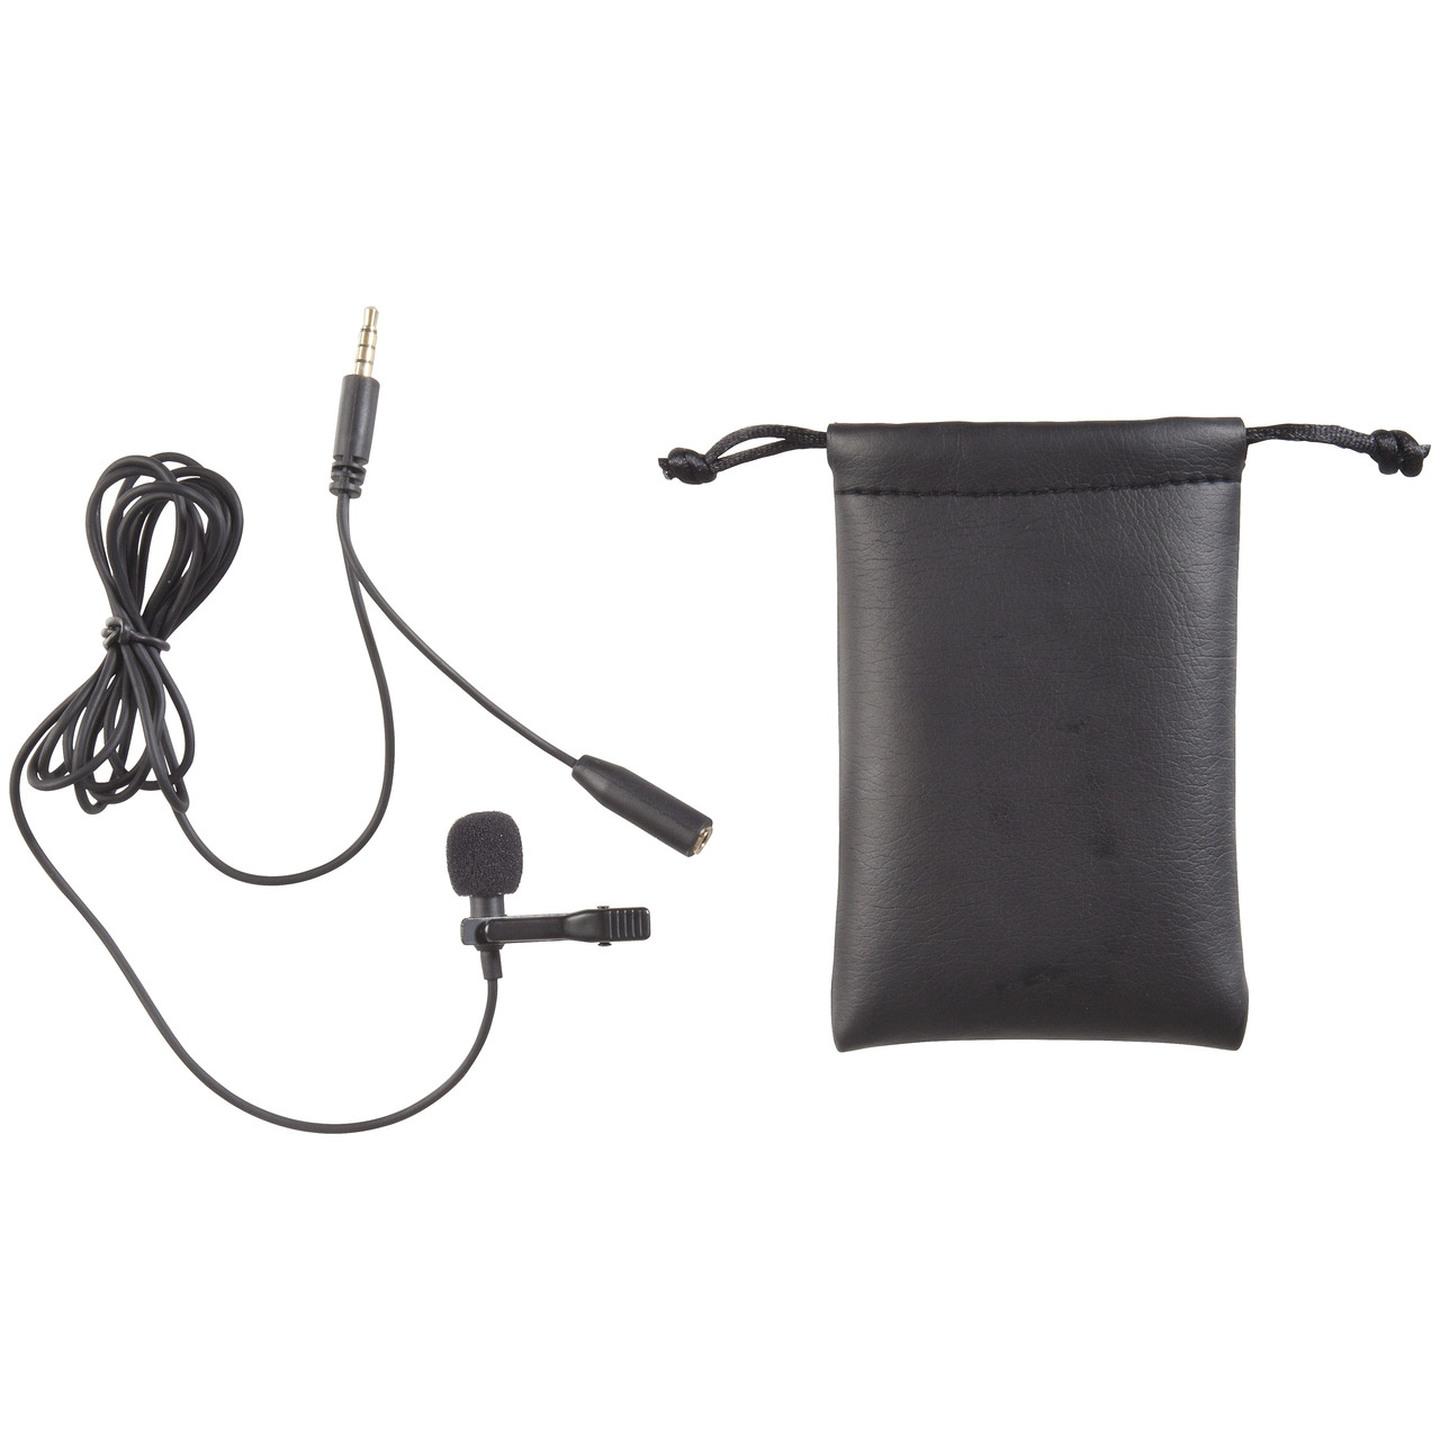 Digitech Stereo Lapel Microphone with Headphone Outlet